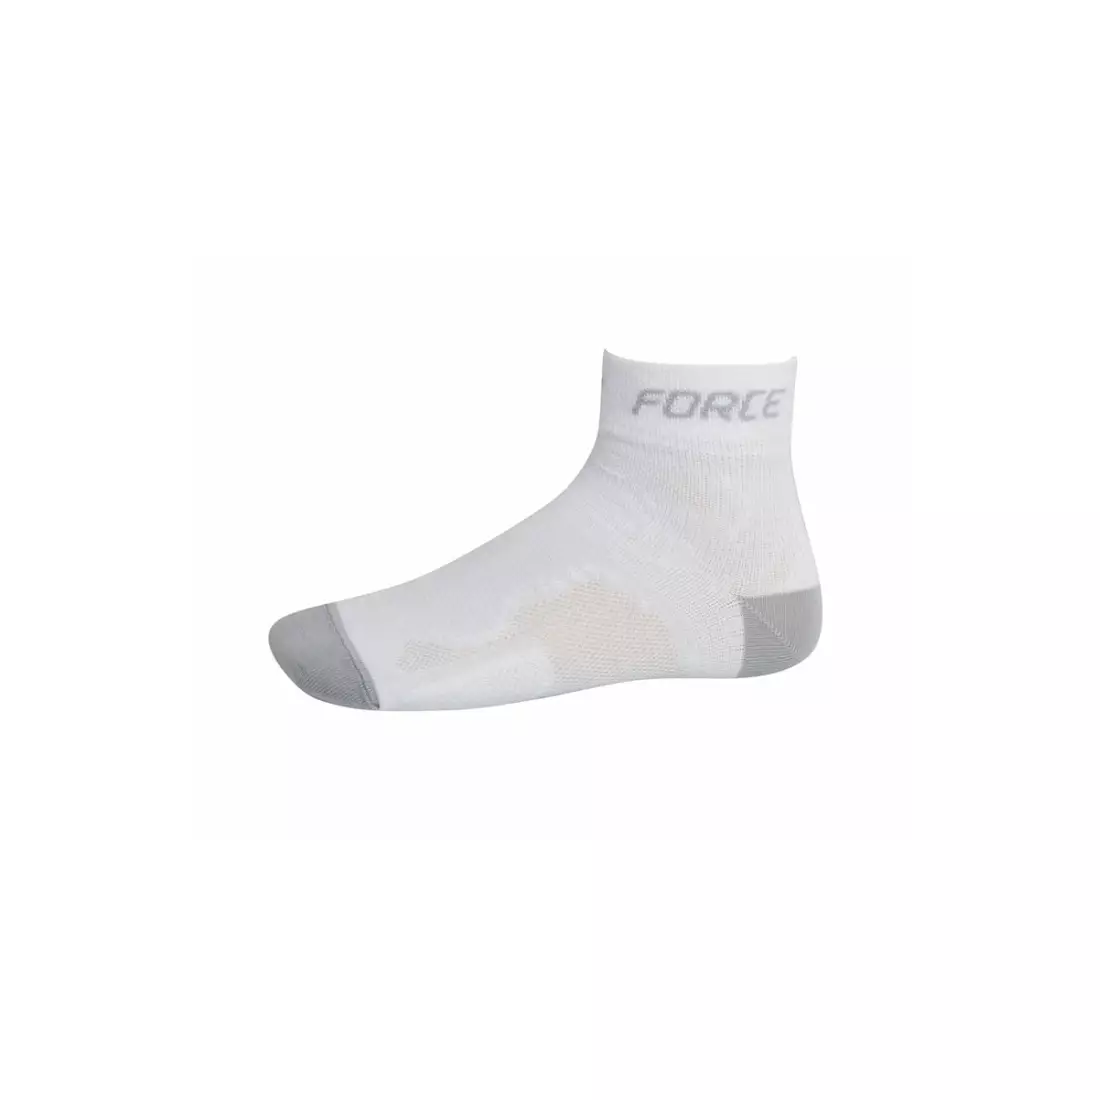 FORCE 2 COOLMAX 901029 sports socks - white and gray